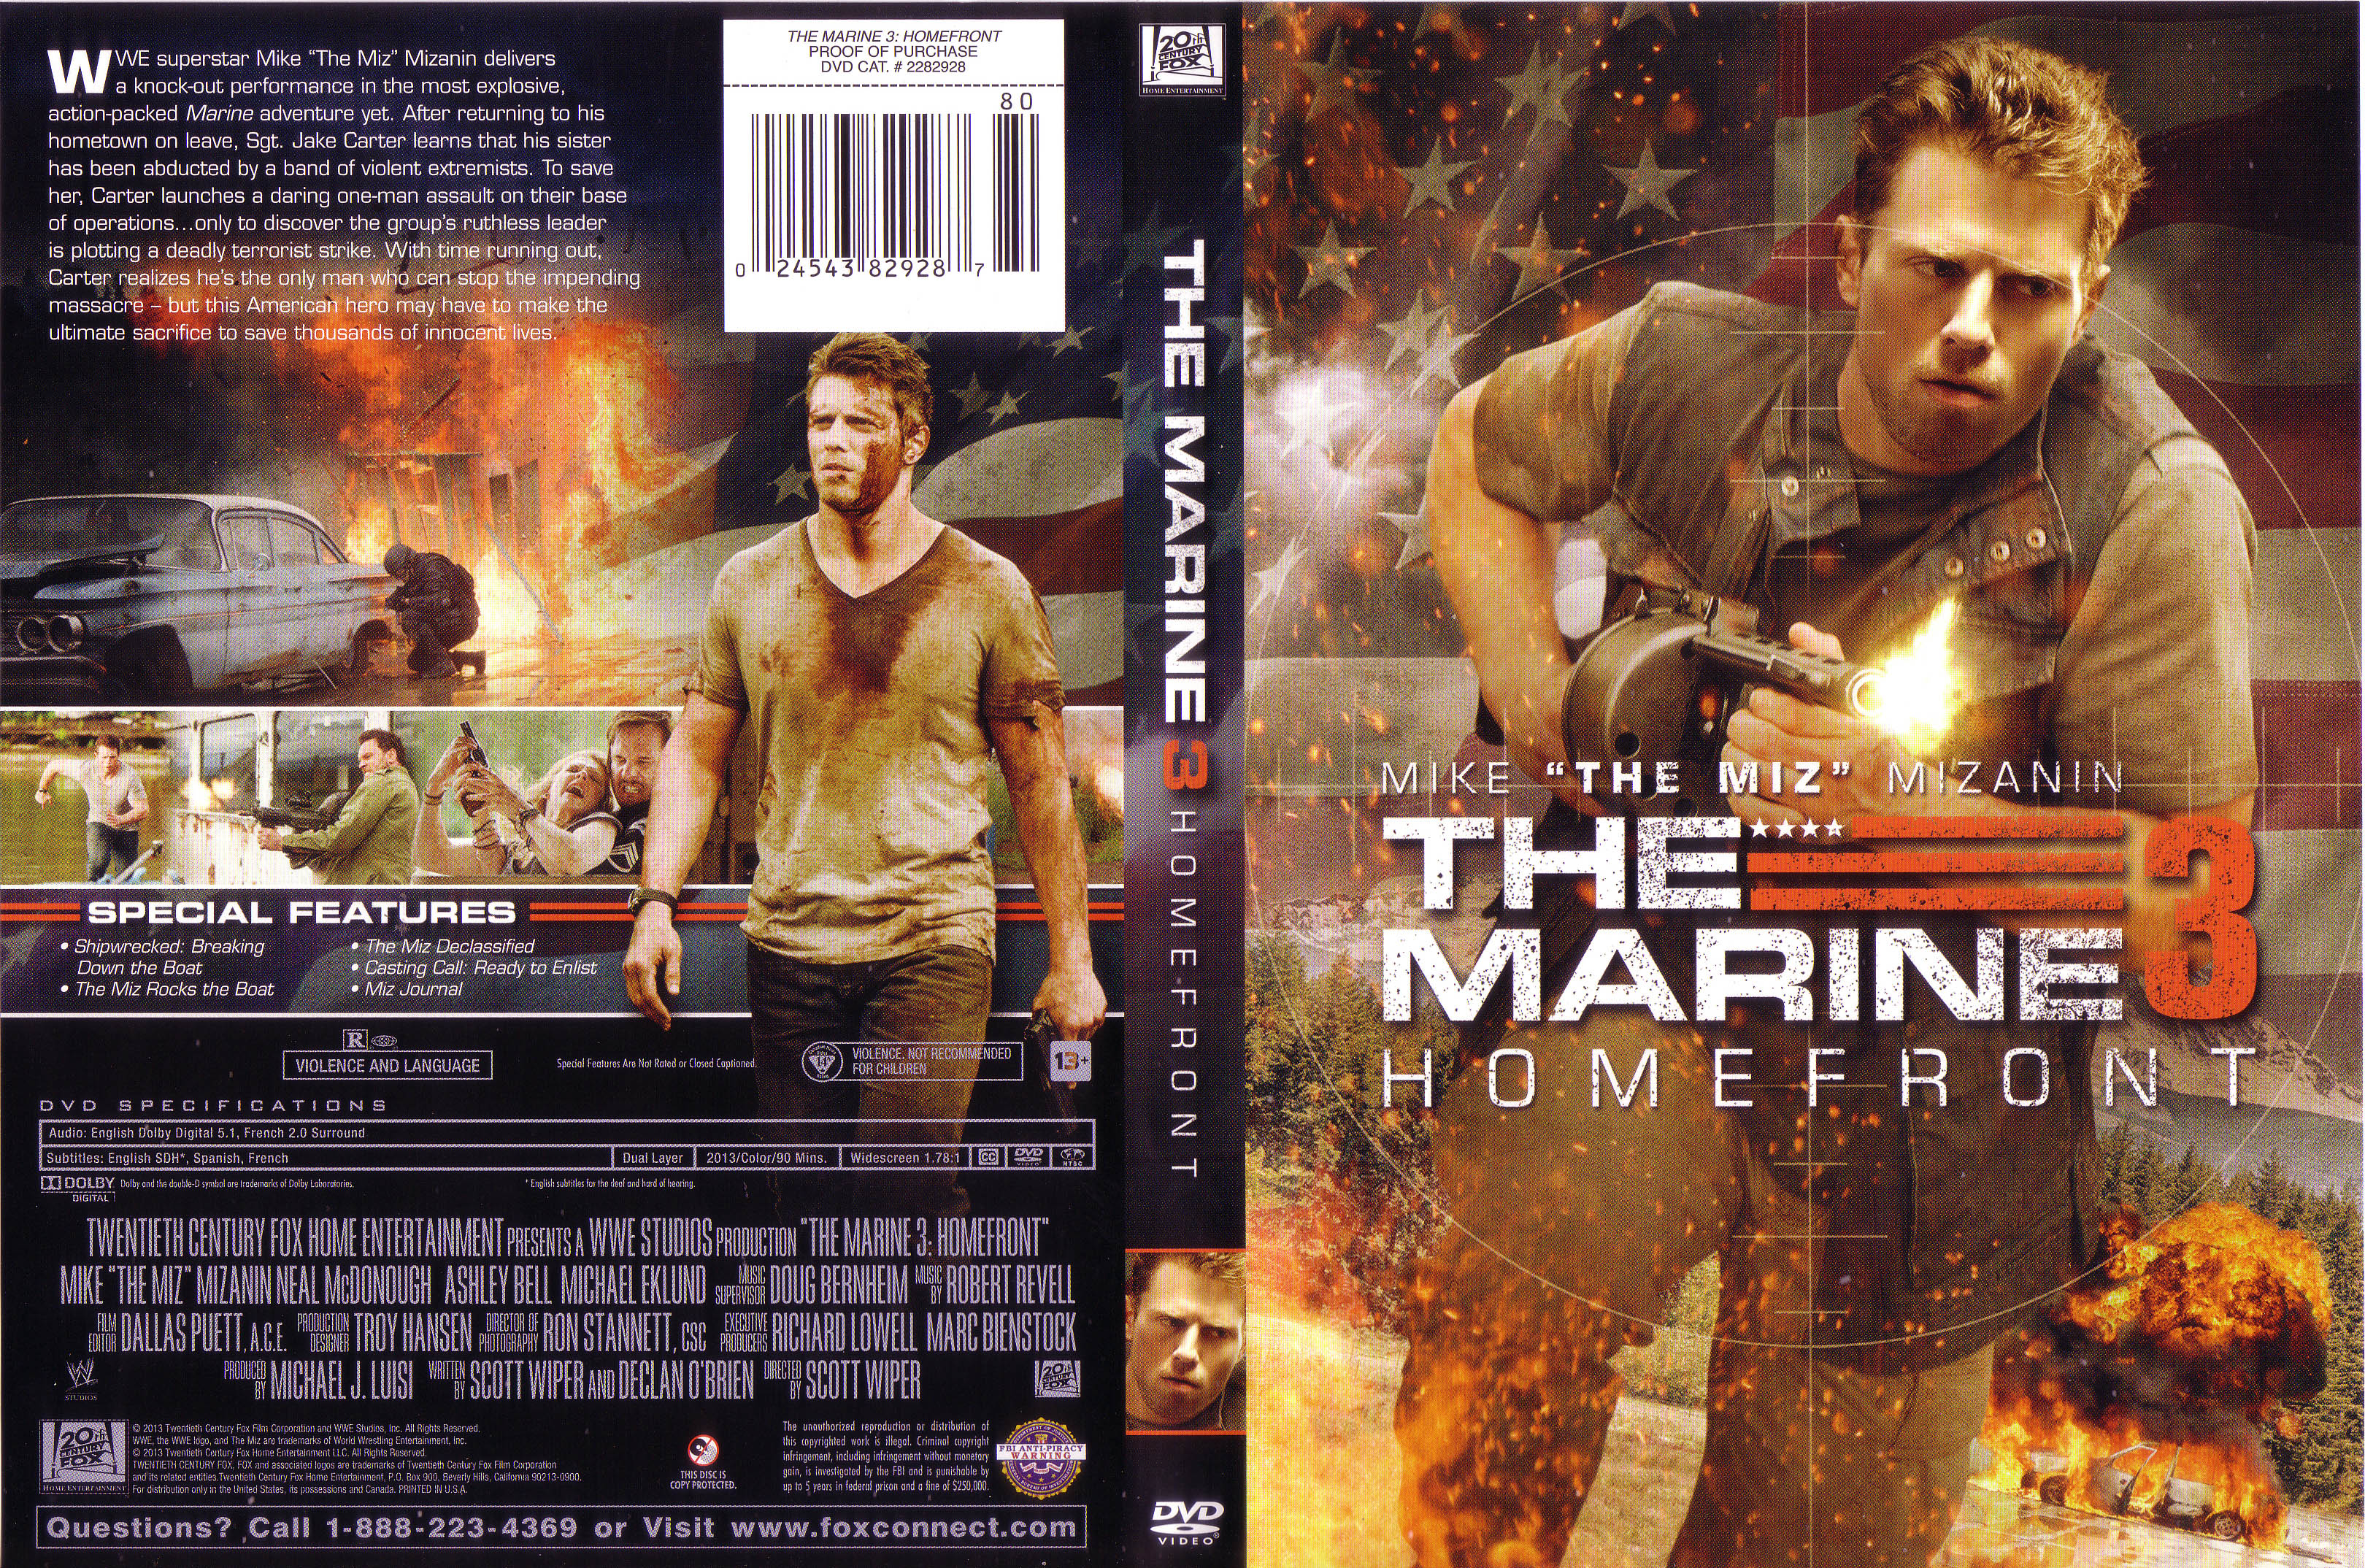 Jaquette DVD The marine 3 Zone 1